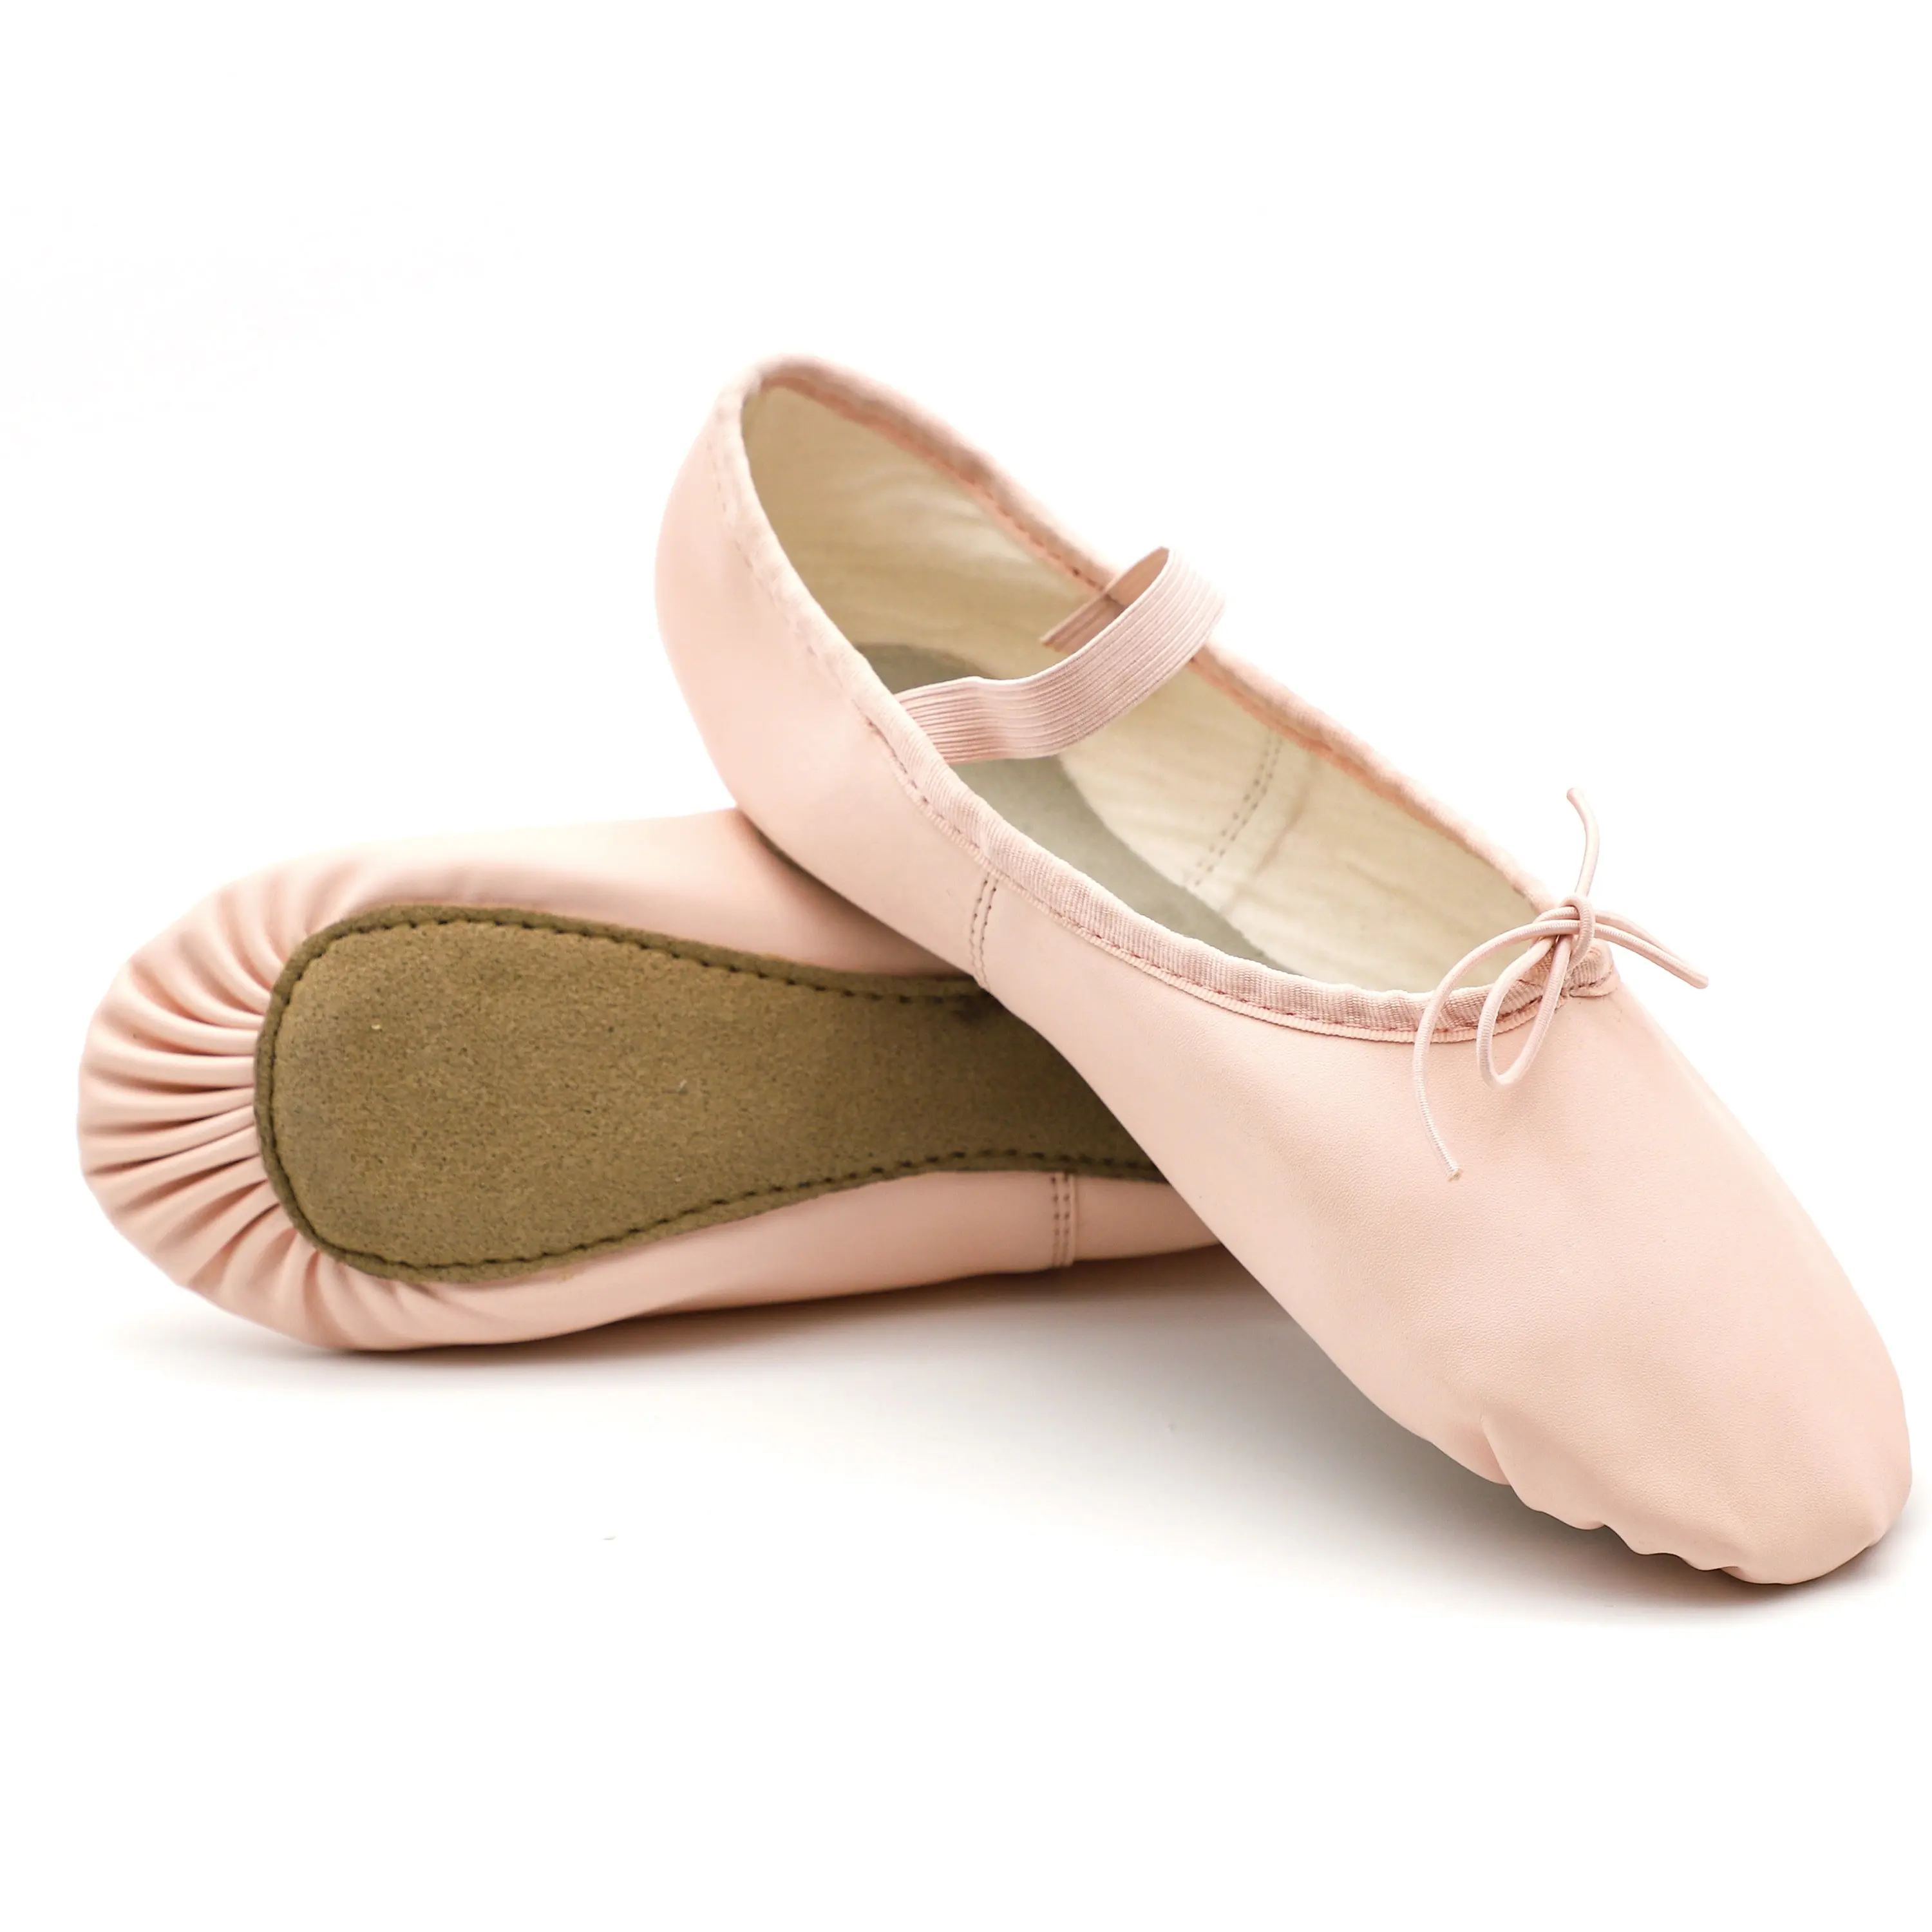 EU and US in Stock Genuine Leather Ballet Shoes/Ballet Slippers/Dance Shoes for Women and Girls